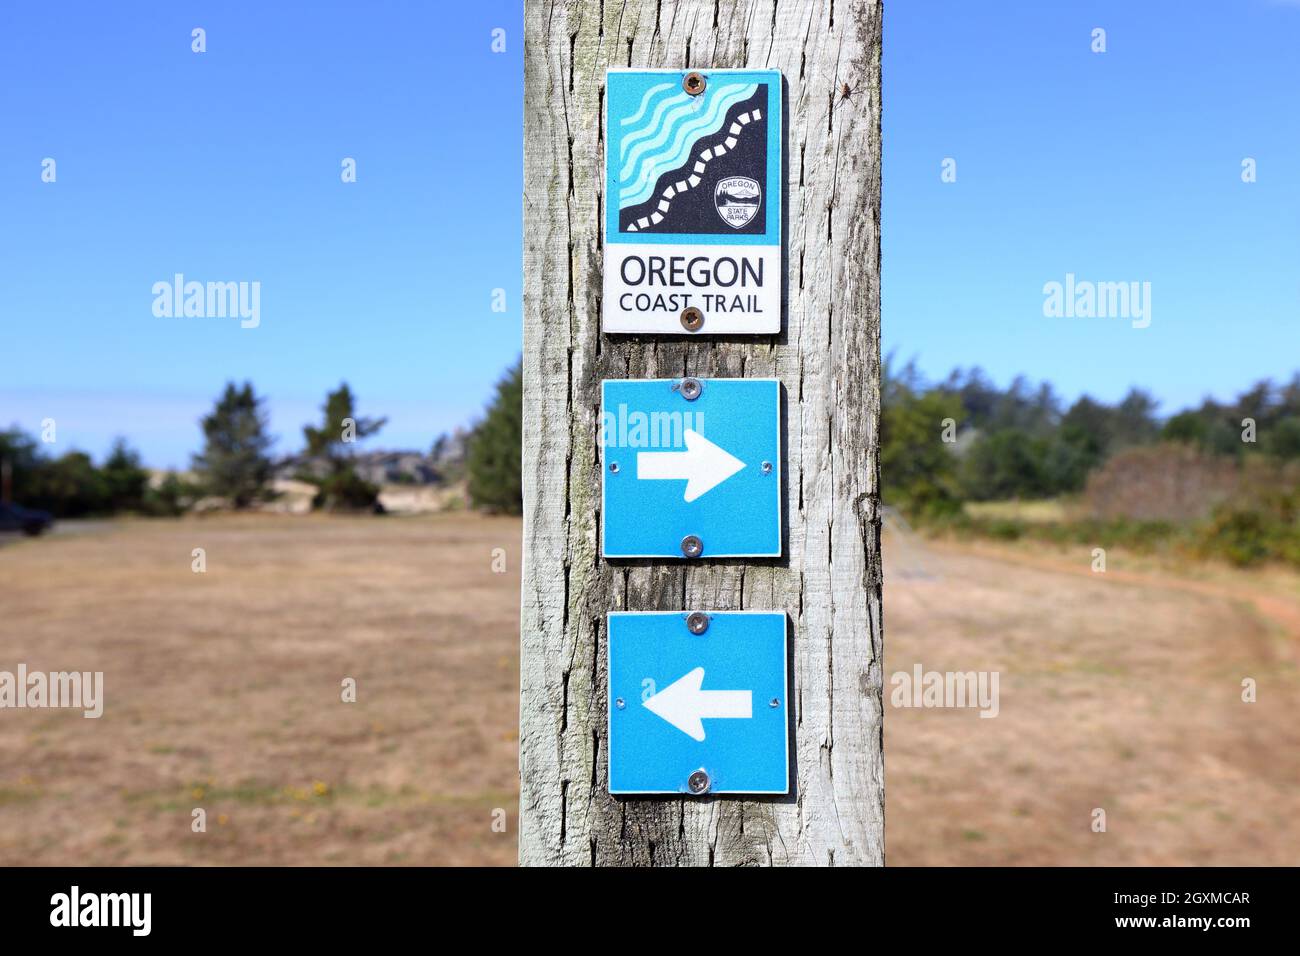 Oregon Coast Trail signage and direction arrows on a wooden pole. Stock Photo